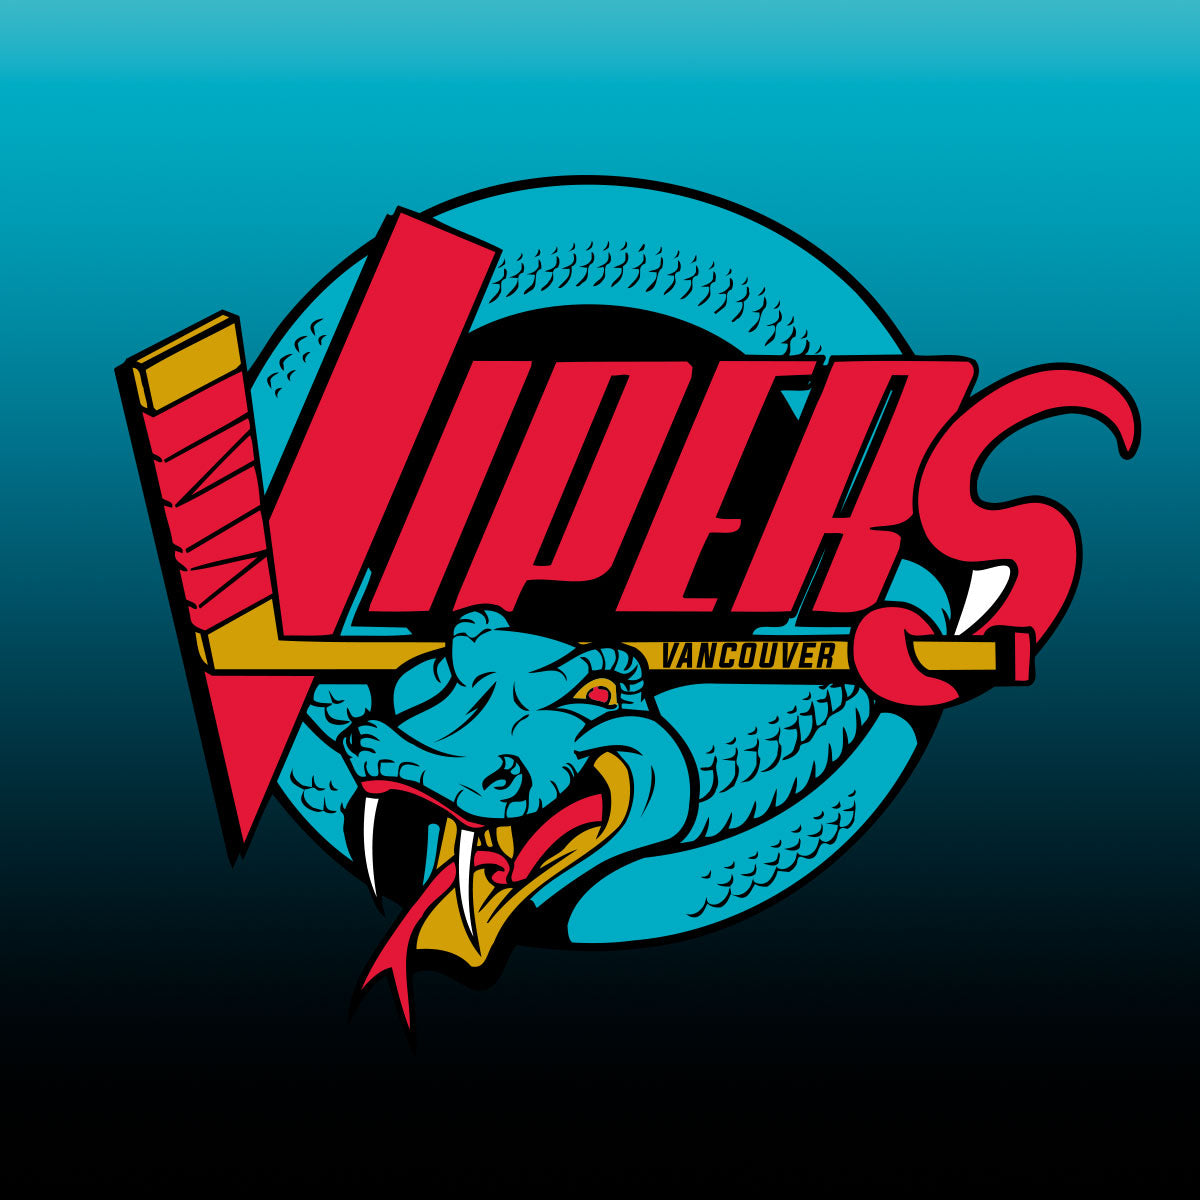 Vancouver Vipers